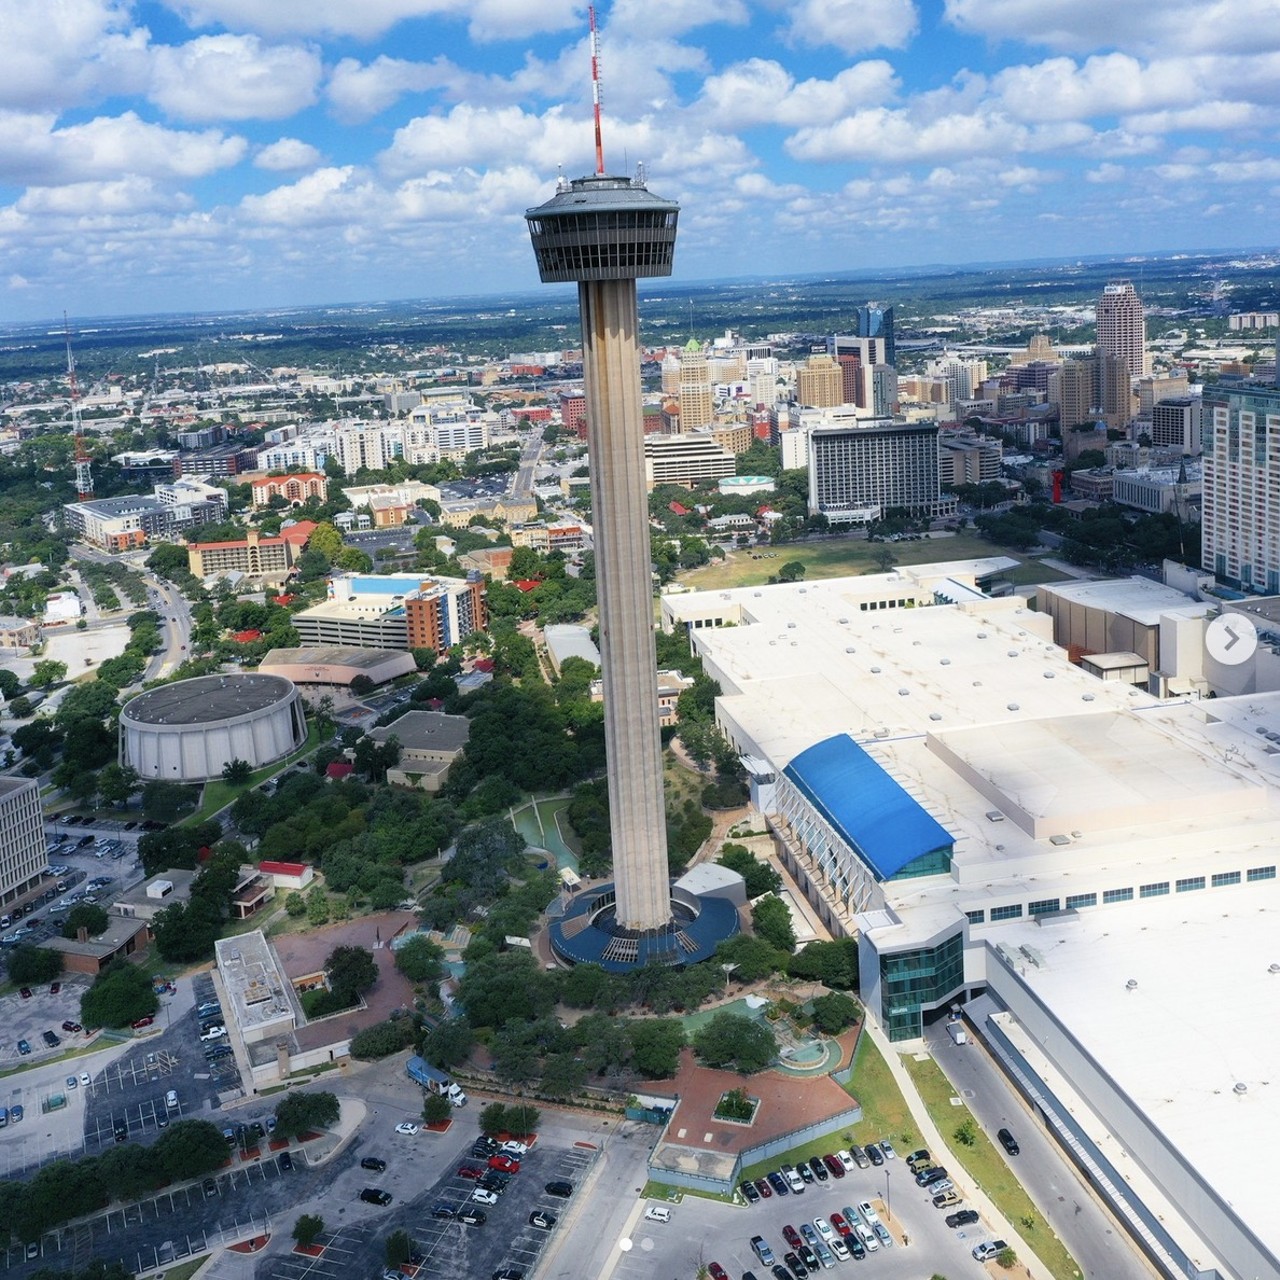 The Tower of the Americas
739 E César E. Chávez Blvd, (210) 223-3101, toweroftheamericas.com
You seriously can’t get a better view of SA than at the Tower of the Americas. Take a ride up the elevator and spend some time on the observation deck to get a view of the city from 750 feet in the air.
Photo via Instagram / 2dm.edia